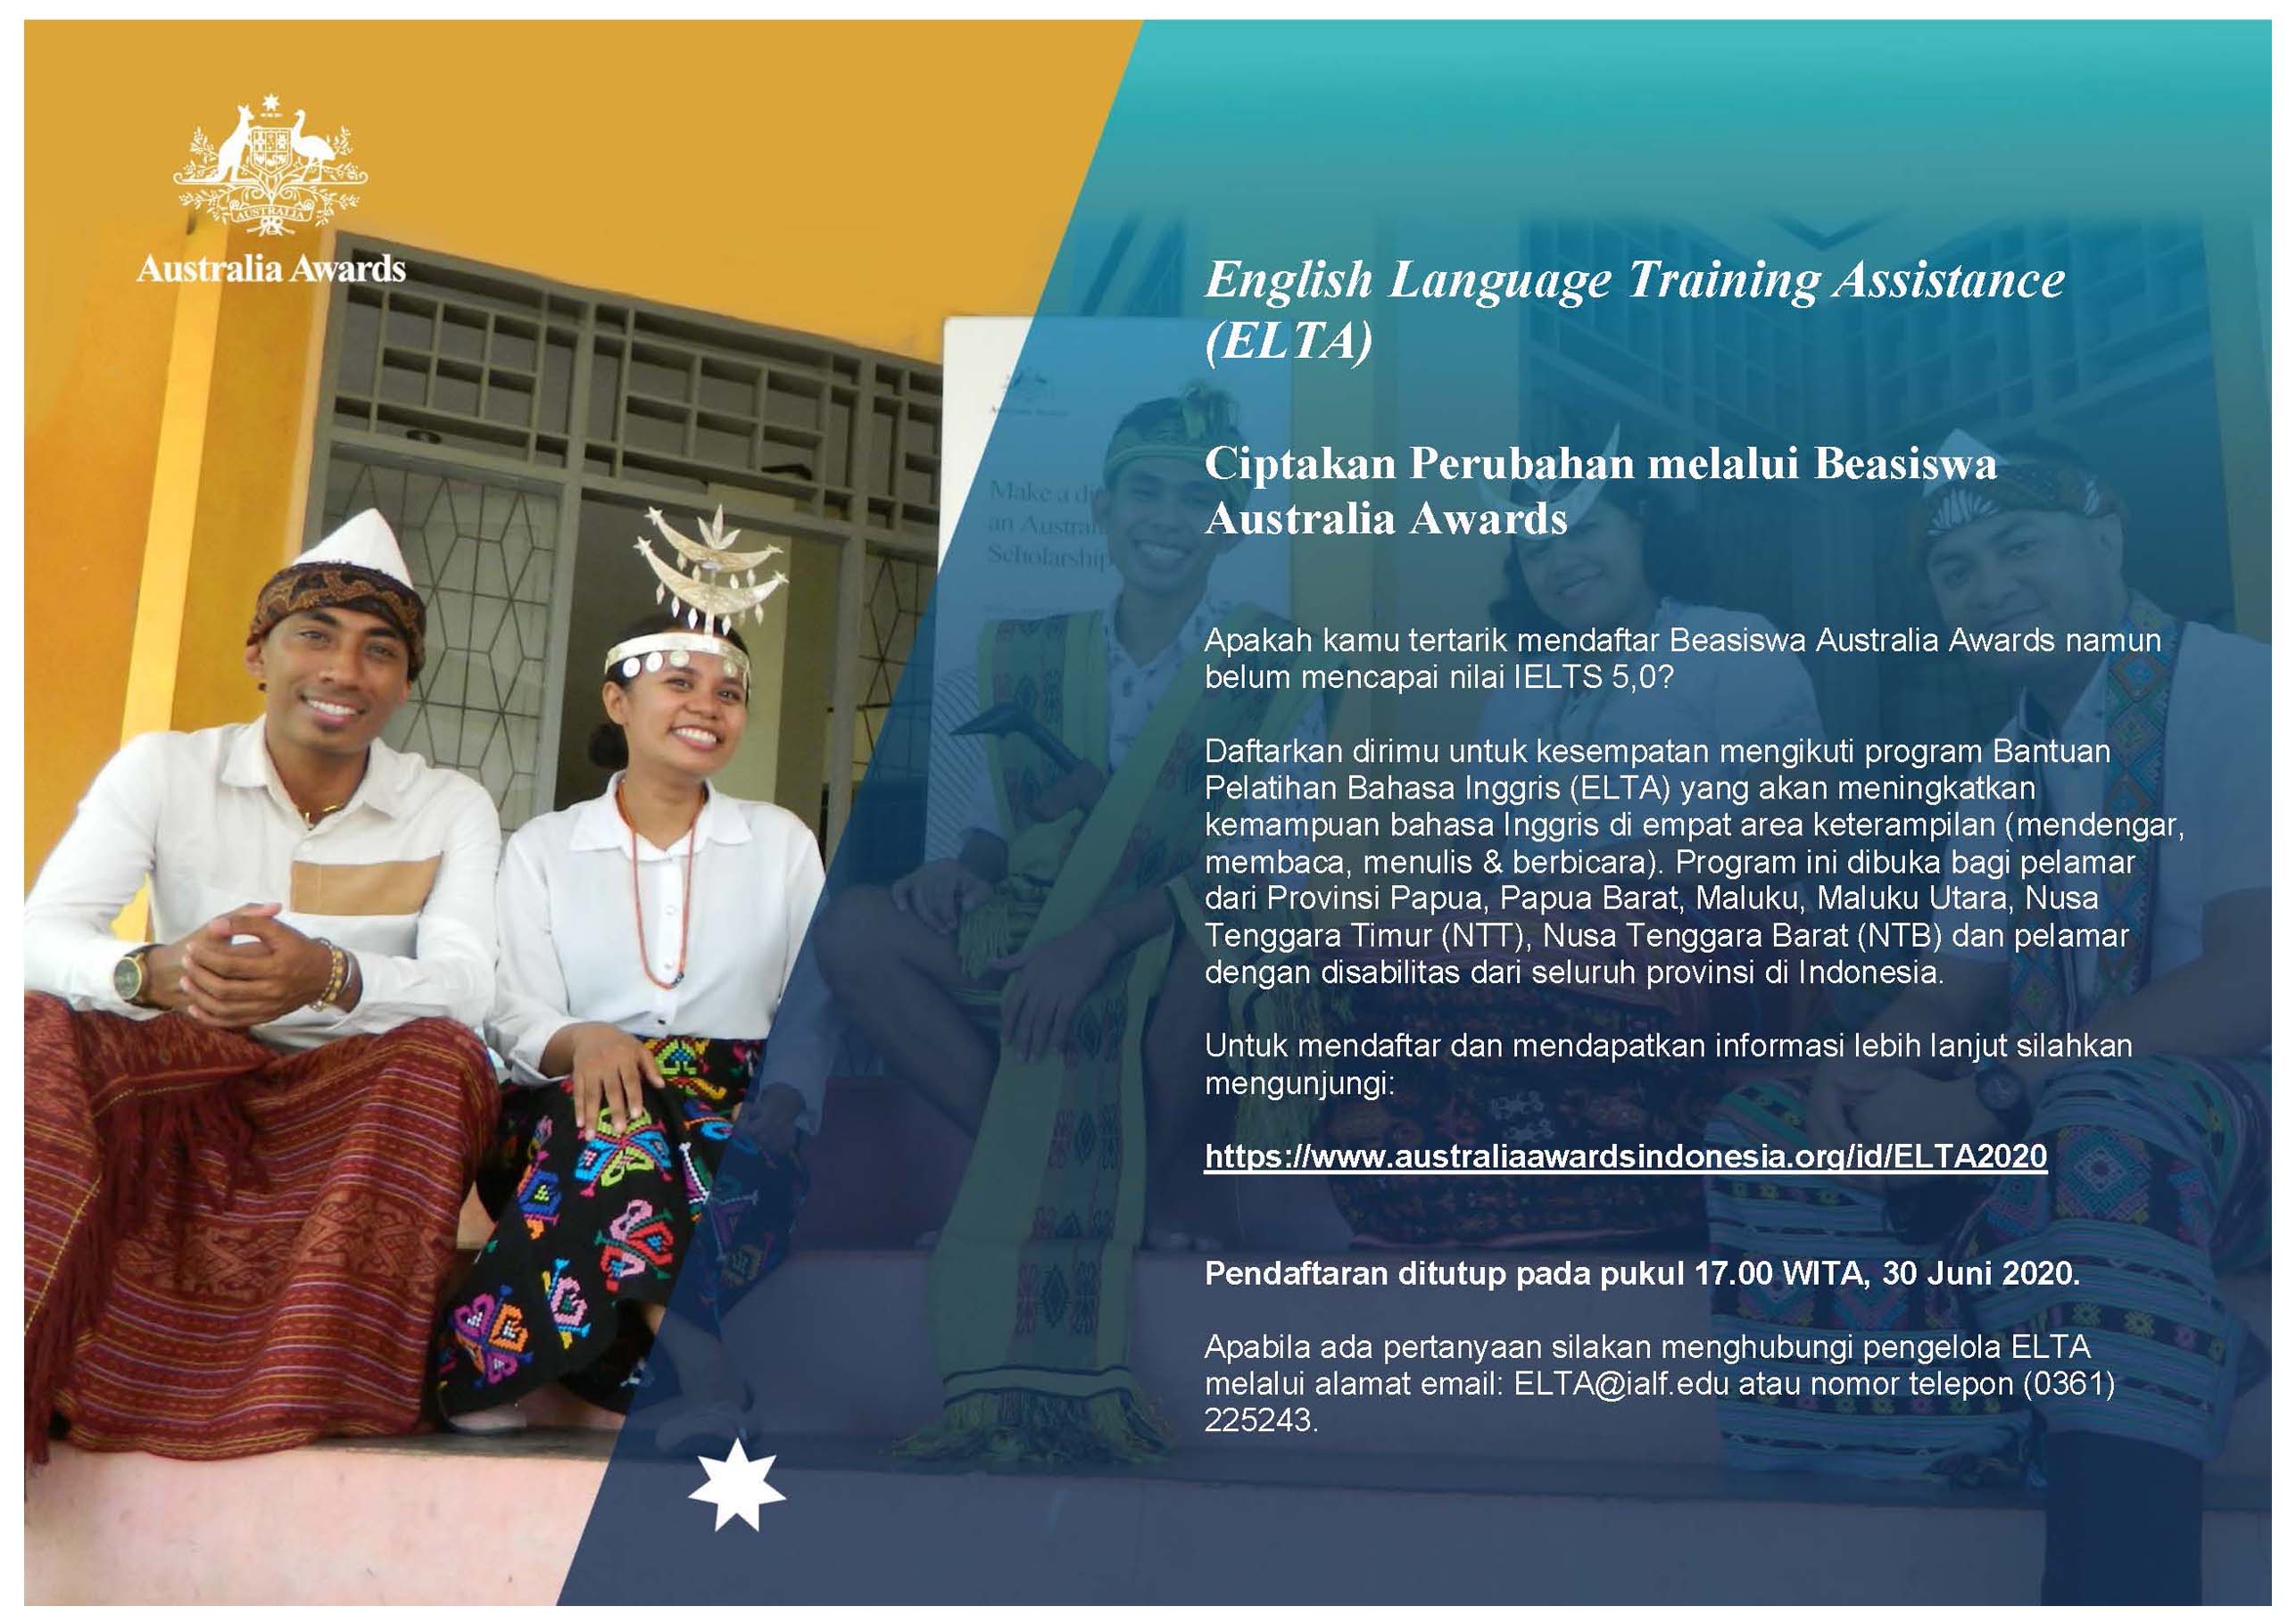 Applications Open for the English Language Training Assistance